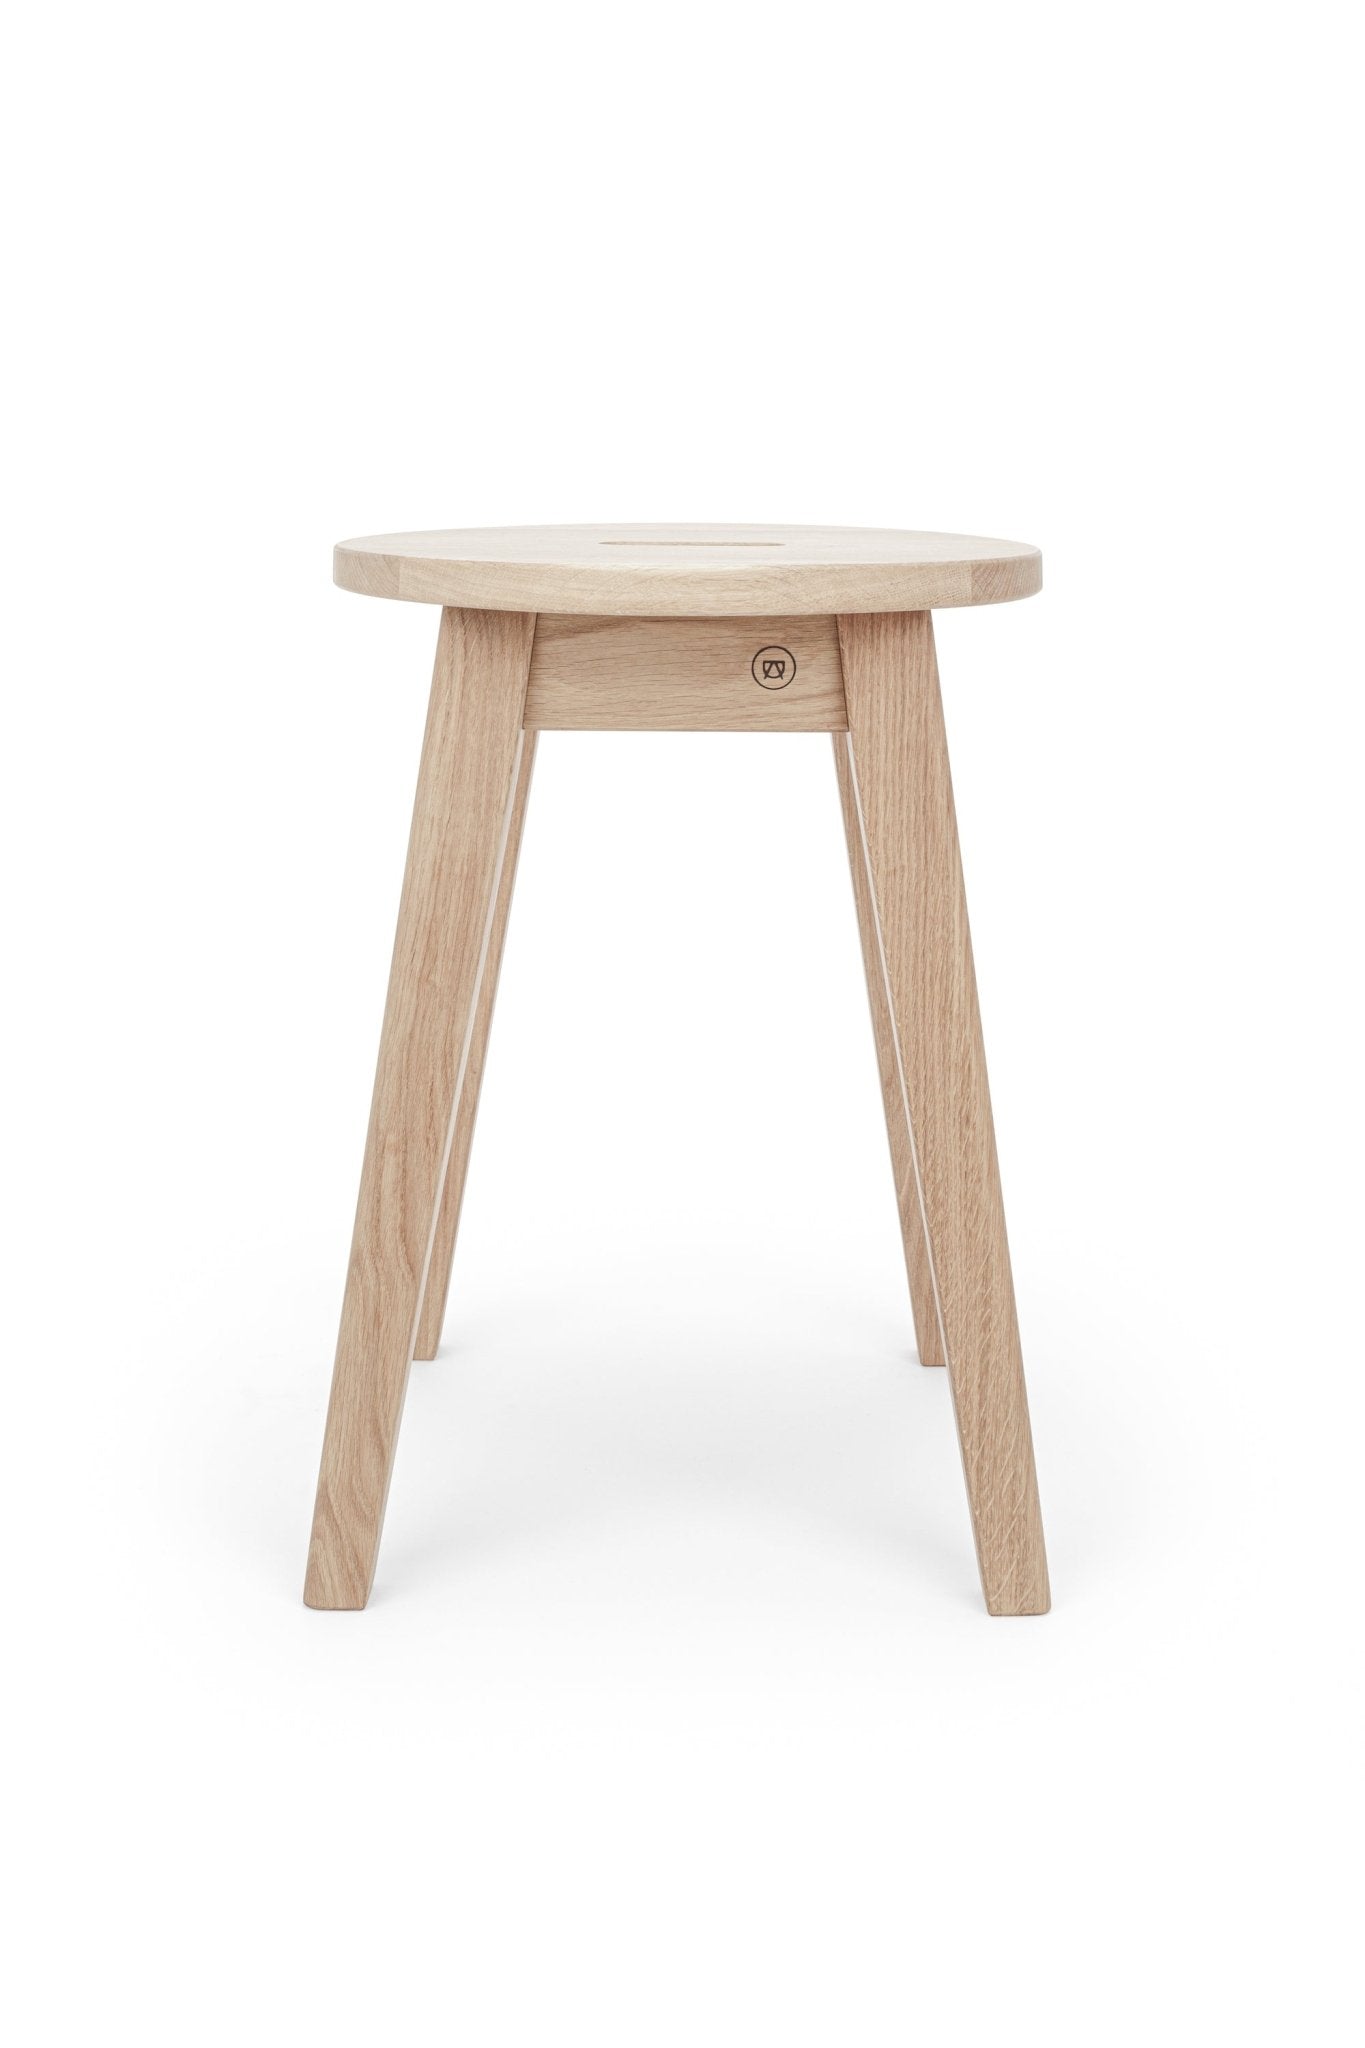 »Josef« stool made of oak wood in a natural look for a stylish eternity